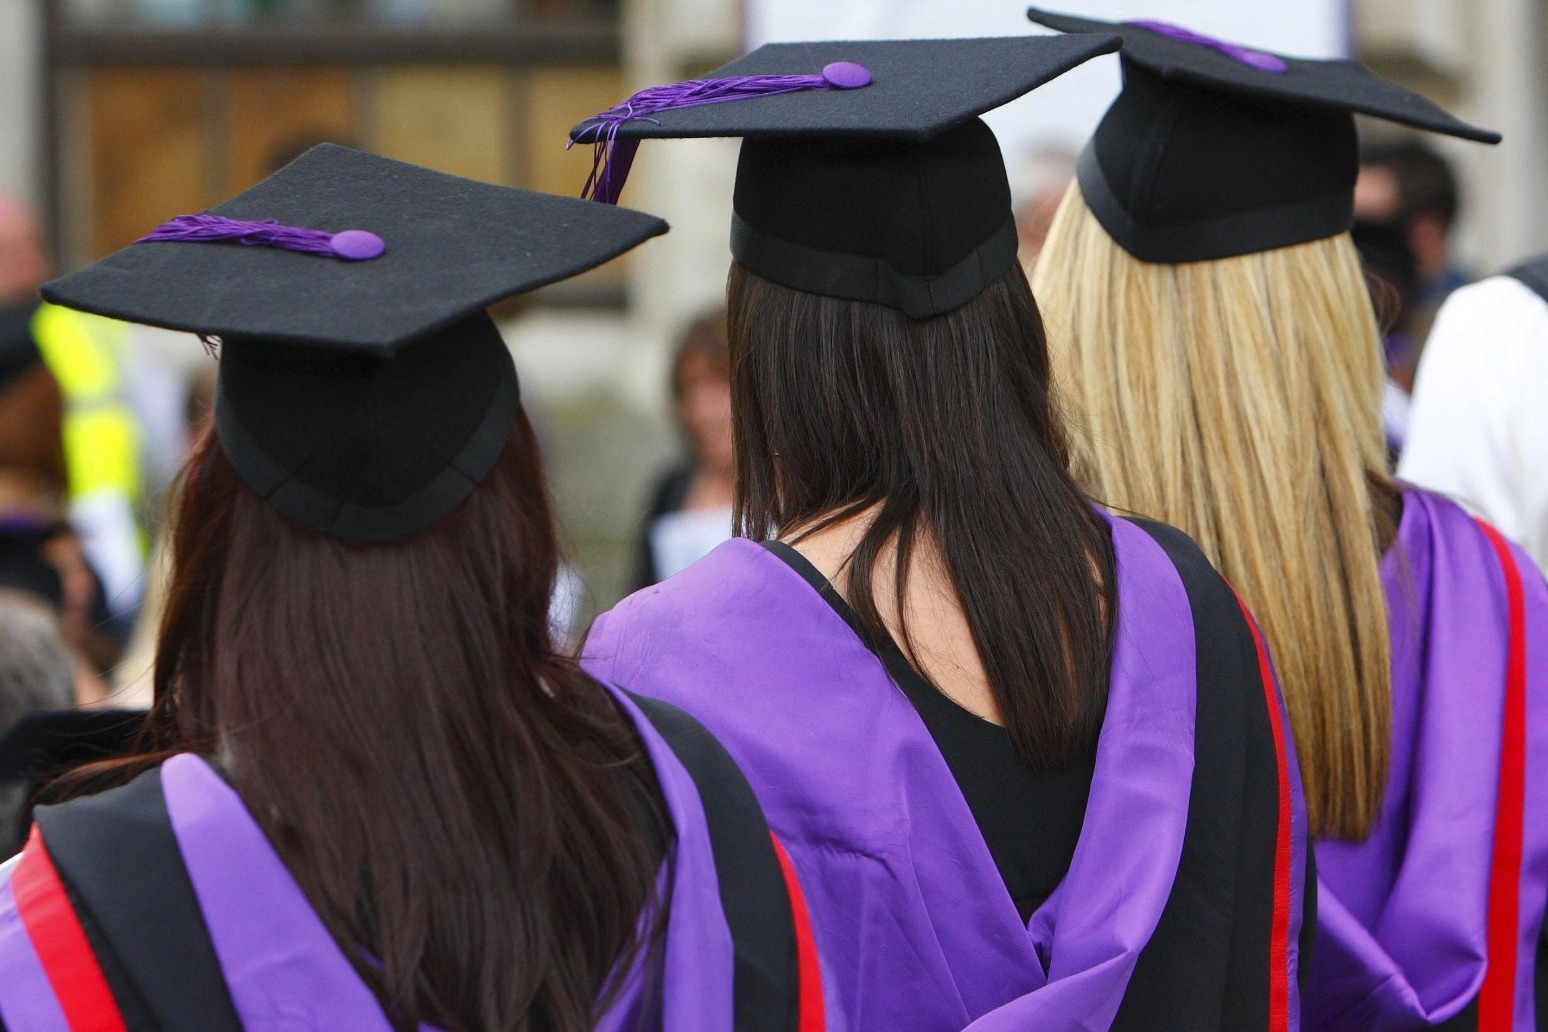 Government announces student numbers cap for ‘rip-off’ university degrees 